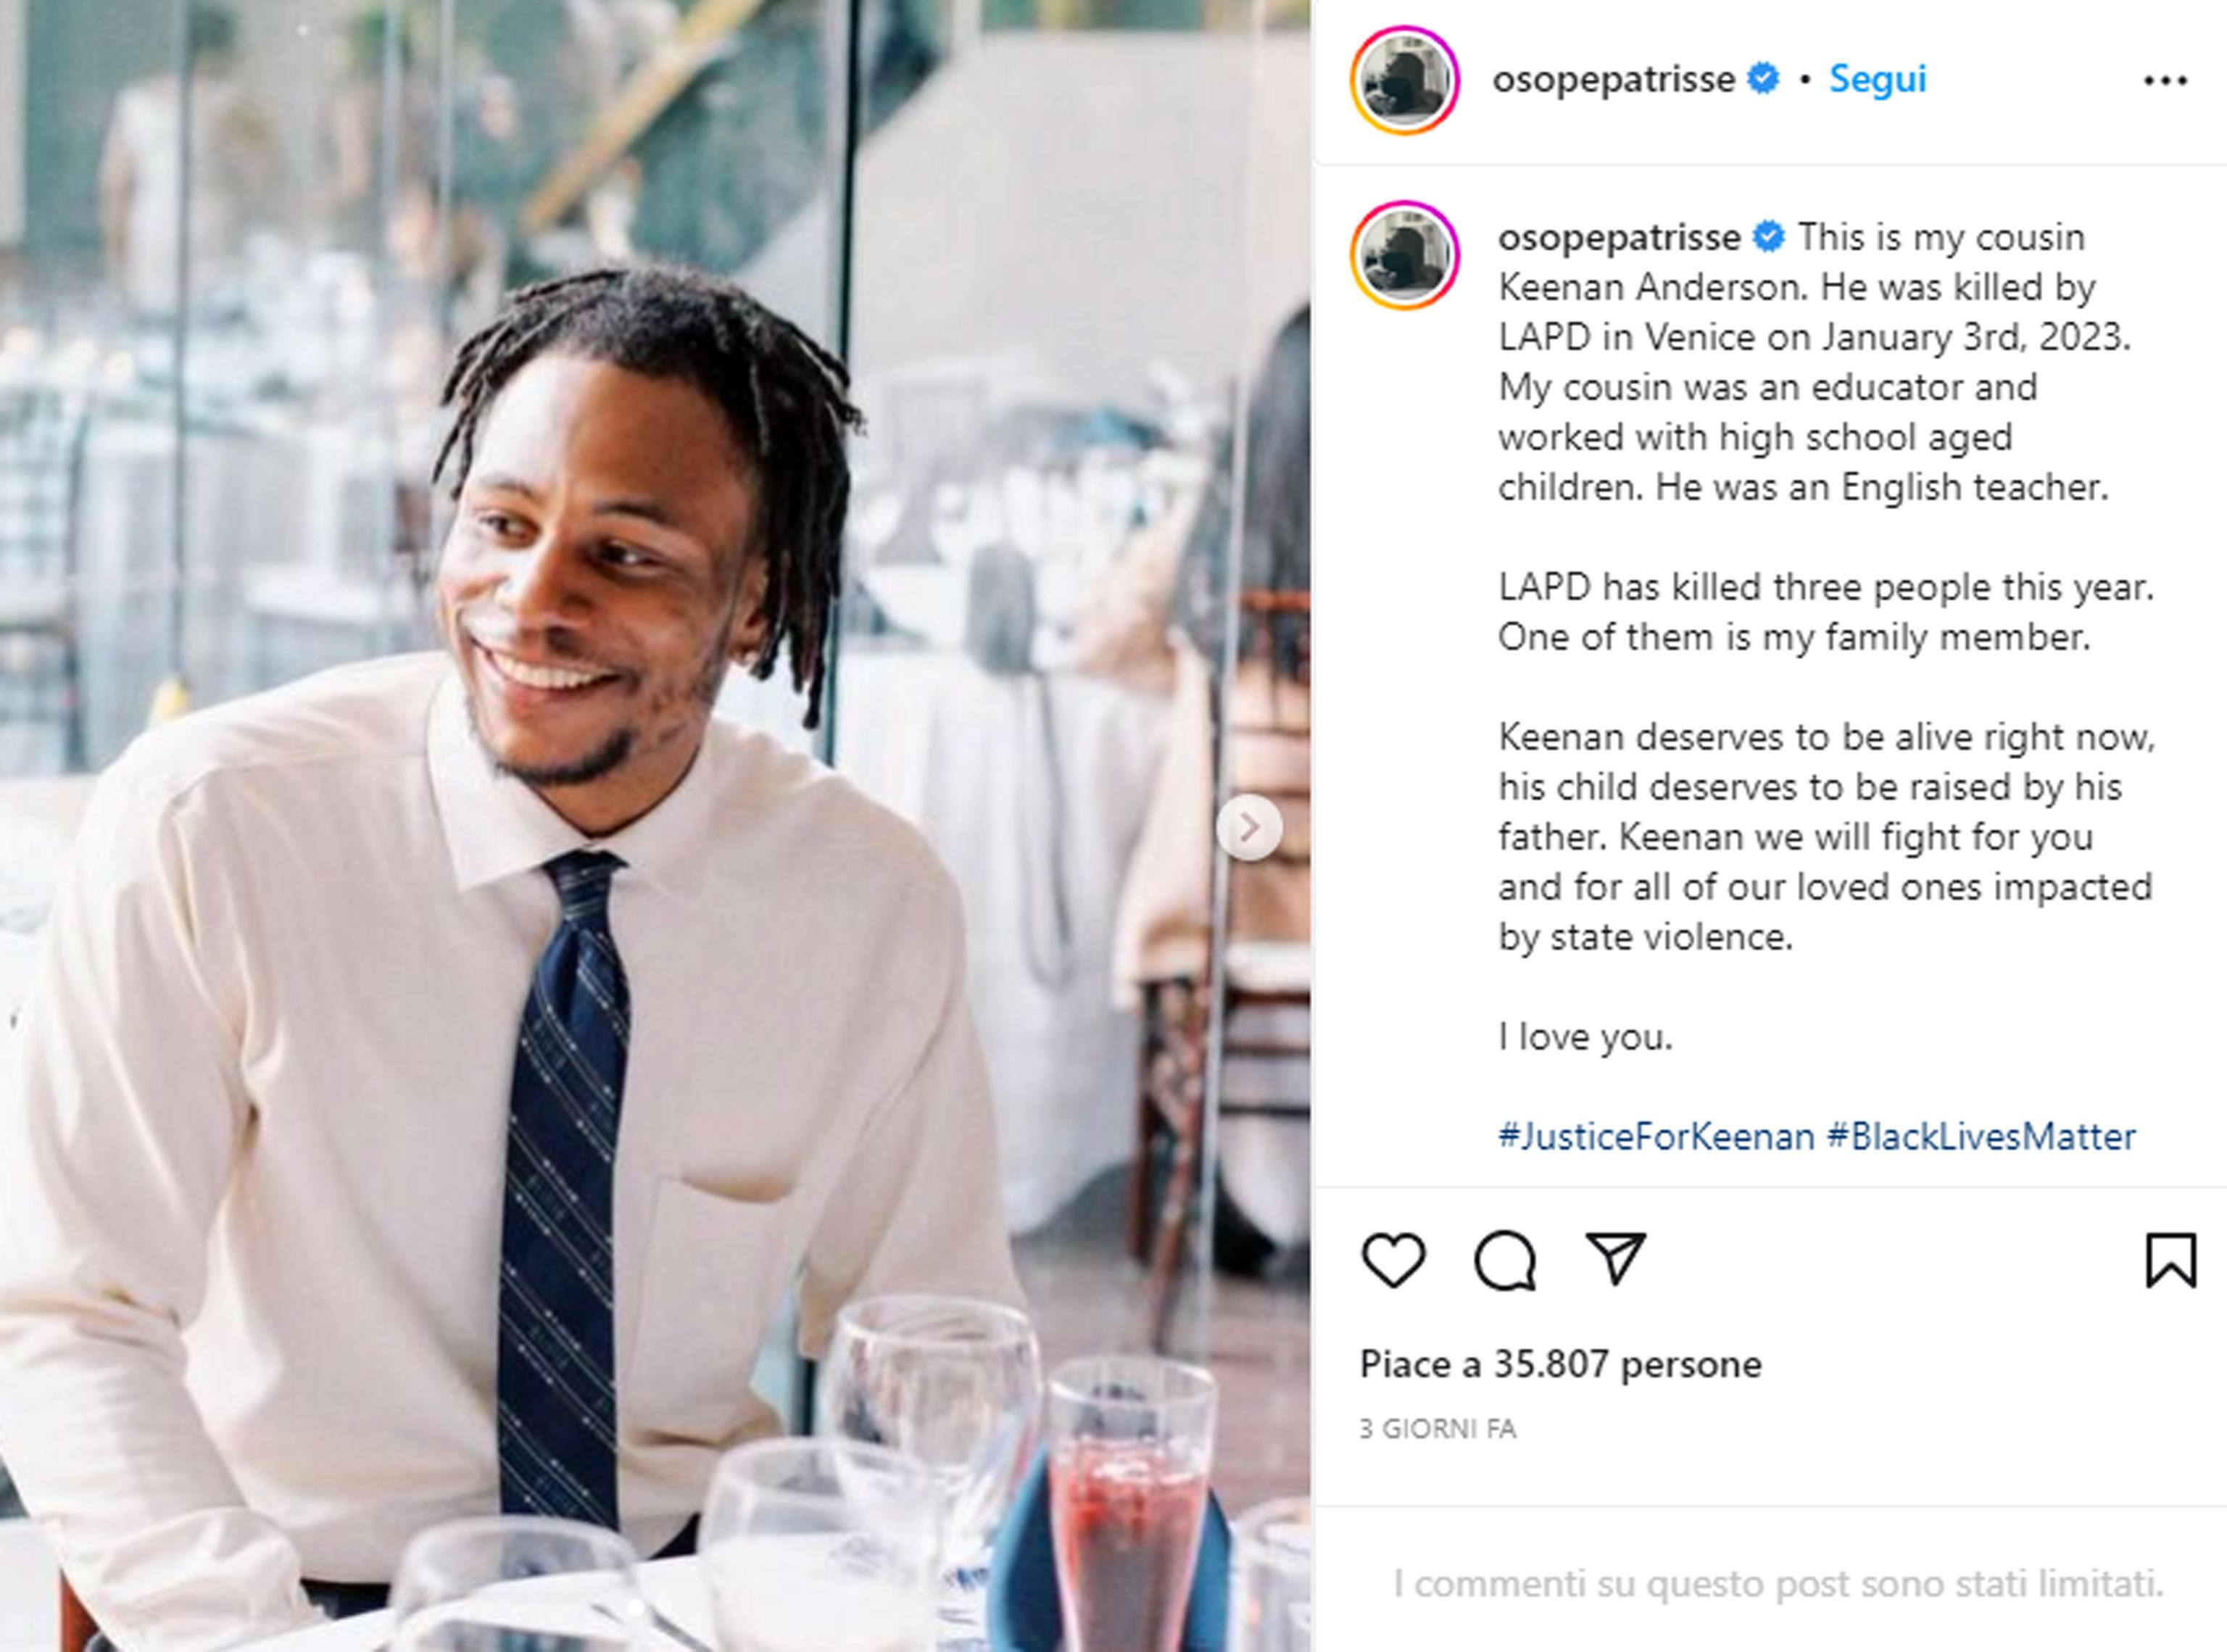 Un post sul profilo Instagram osopepatrisse: This is my cousin Keenan Anderson. He was killed by LAPD in Venice on January 3rd, 2023. My cousin was an educator and worked with high school aged children. He was an English teacher. LAPD has killed three people this year. One of them is my family member. Keenan deserves to be alive right now, his child deserves to be raised by his father. Keenan we will fight for you and for all of our loved ones impacted by state violence. I love you. #JusticeForKeenan #BlackLivesMatter
INSTAGRAM OSOPEPATRISSE
+++ATTENZIONE LA FOTO NON PUO' ESSERE PUBBLICATA O RIPRODOTTA SENZA L'AUTORIZZAZIONE DELLA FONTE DI ORIGINE CUI SI RINVIA+++ (NPK)